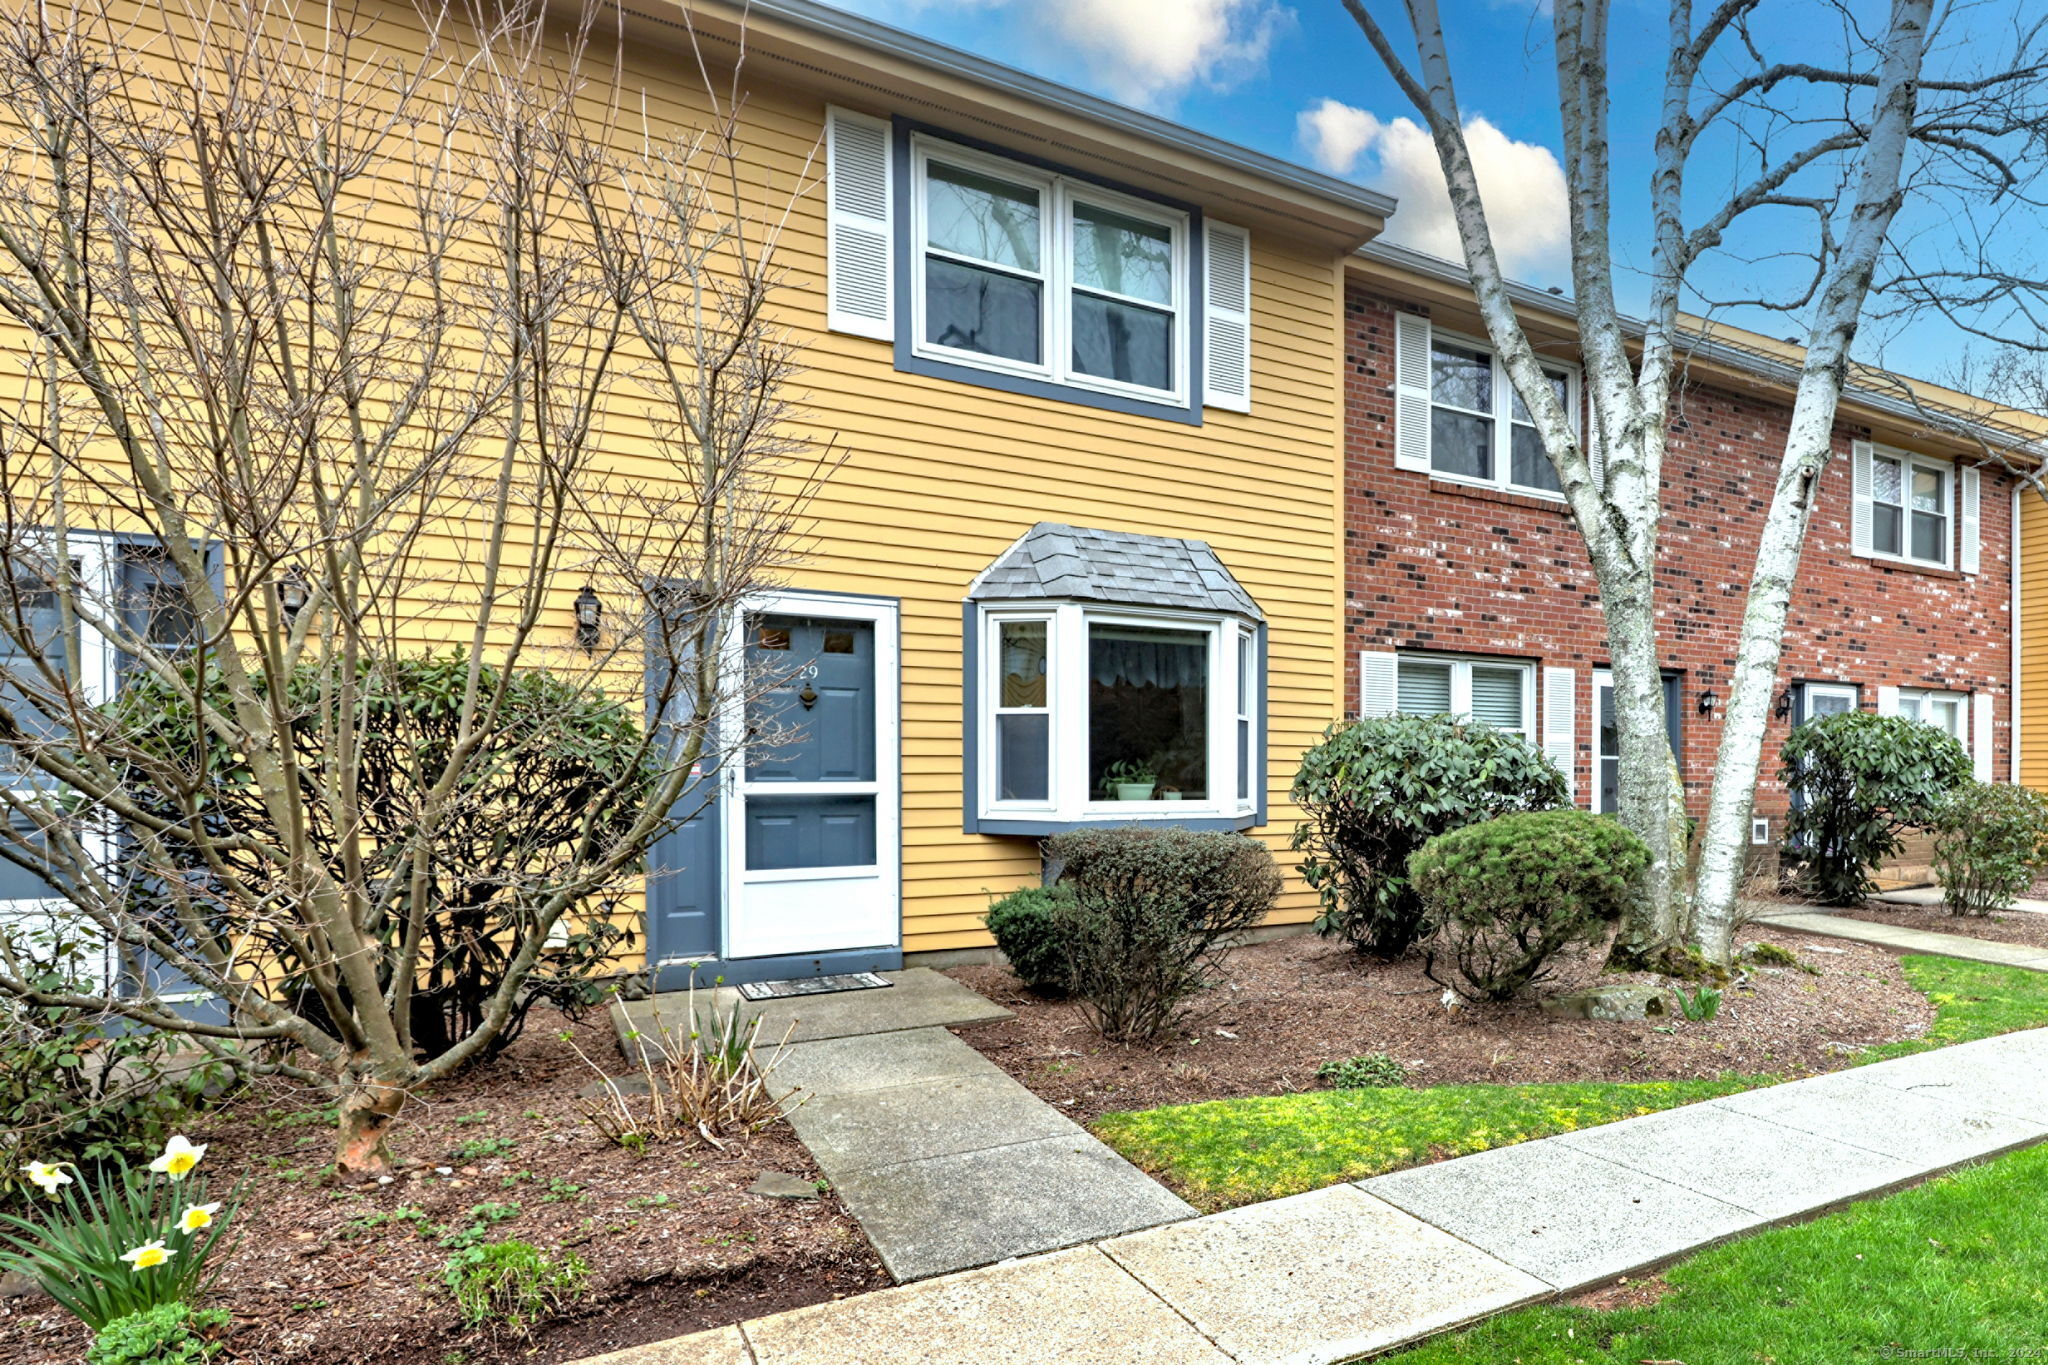 View North Haven, CT 06473 townhome